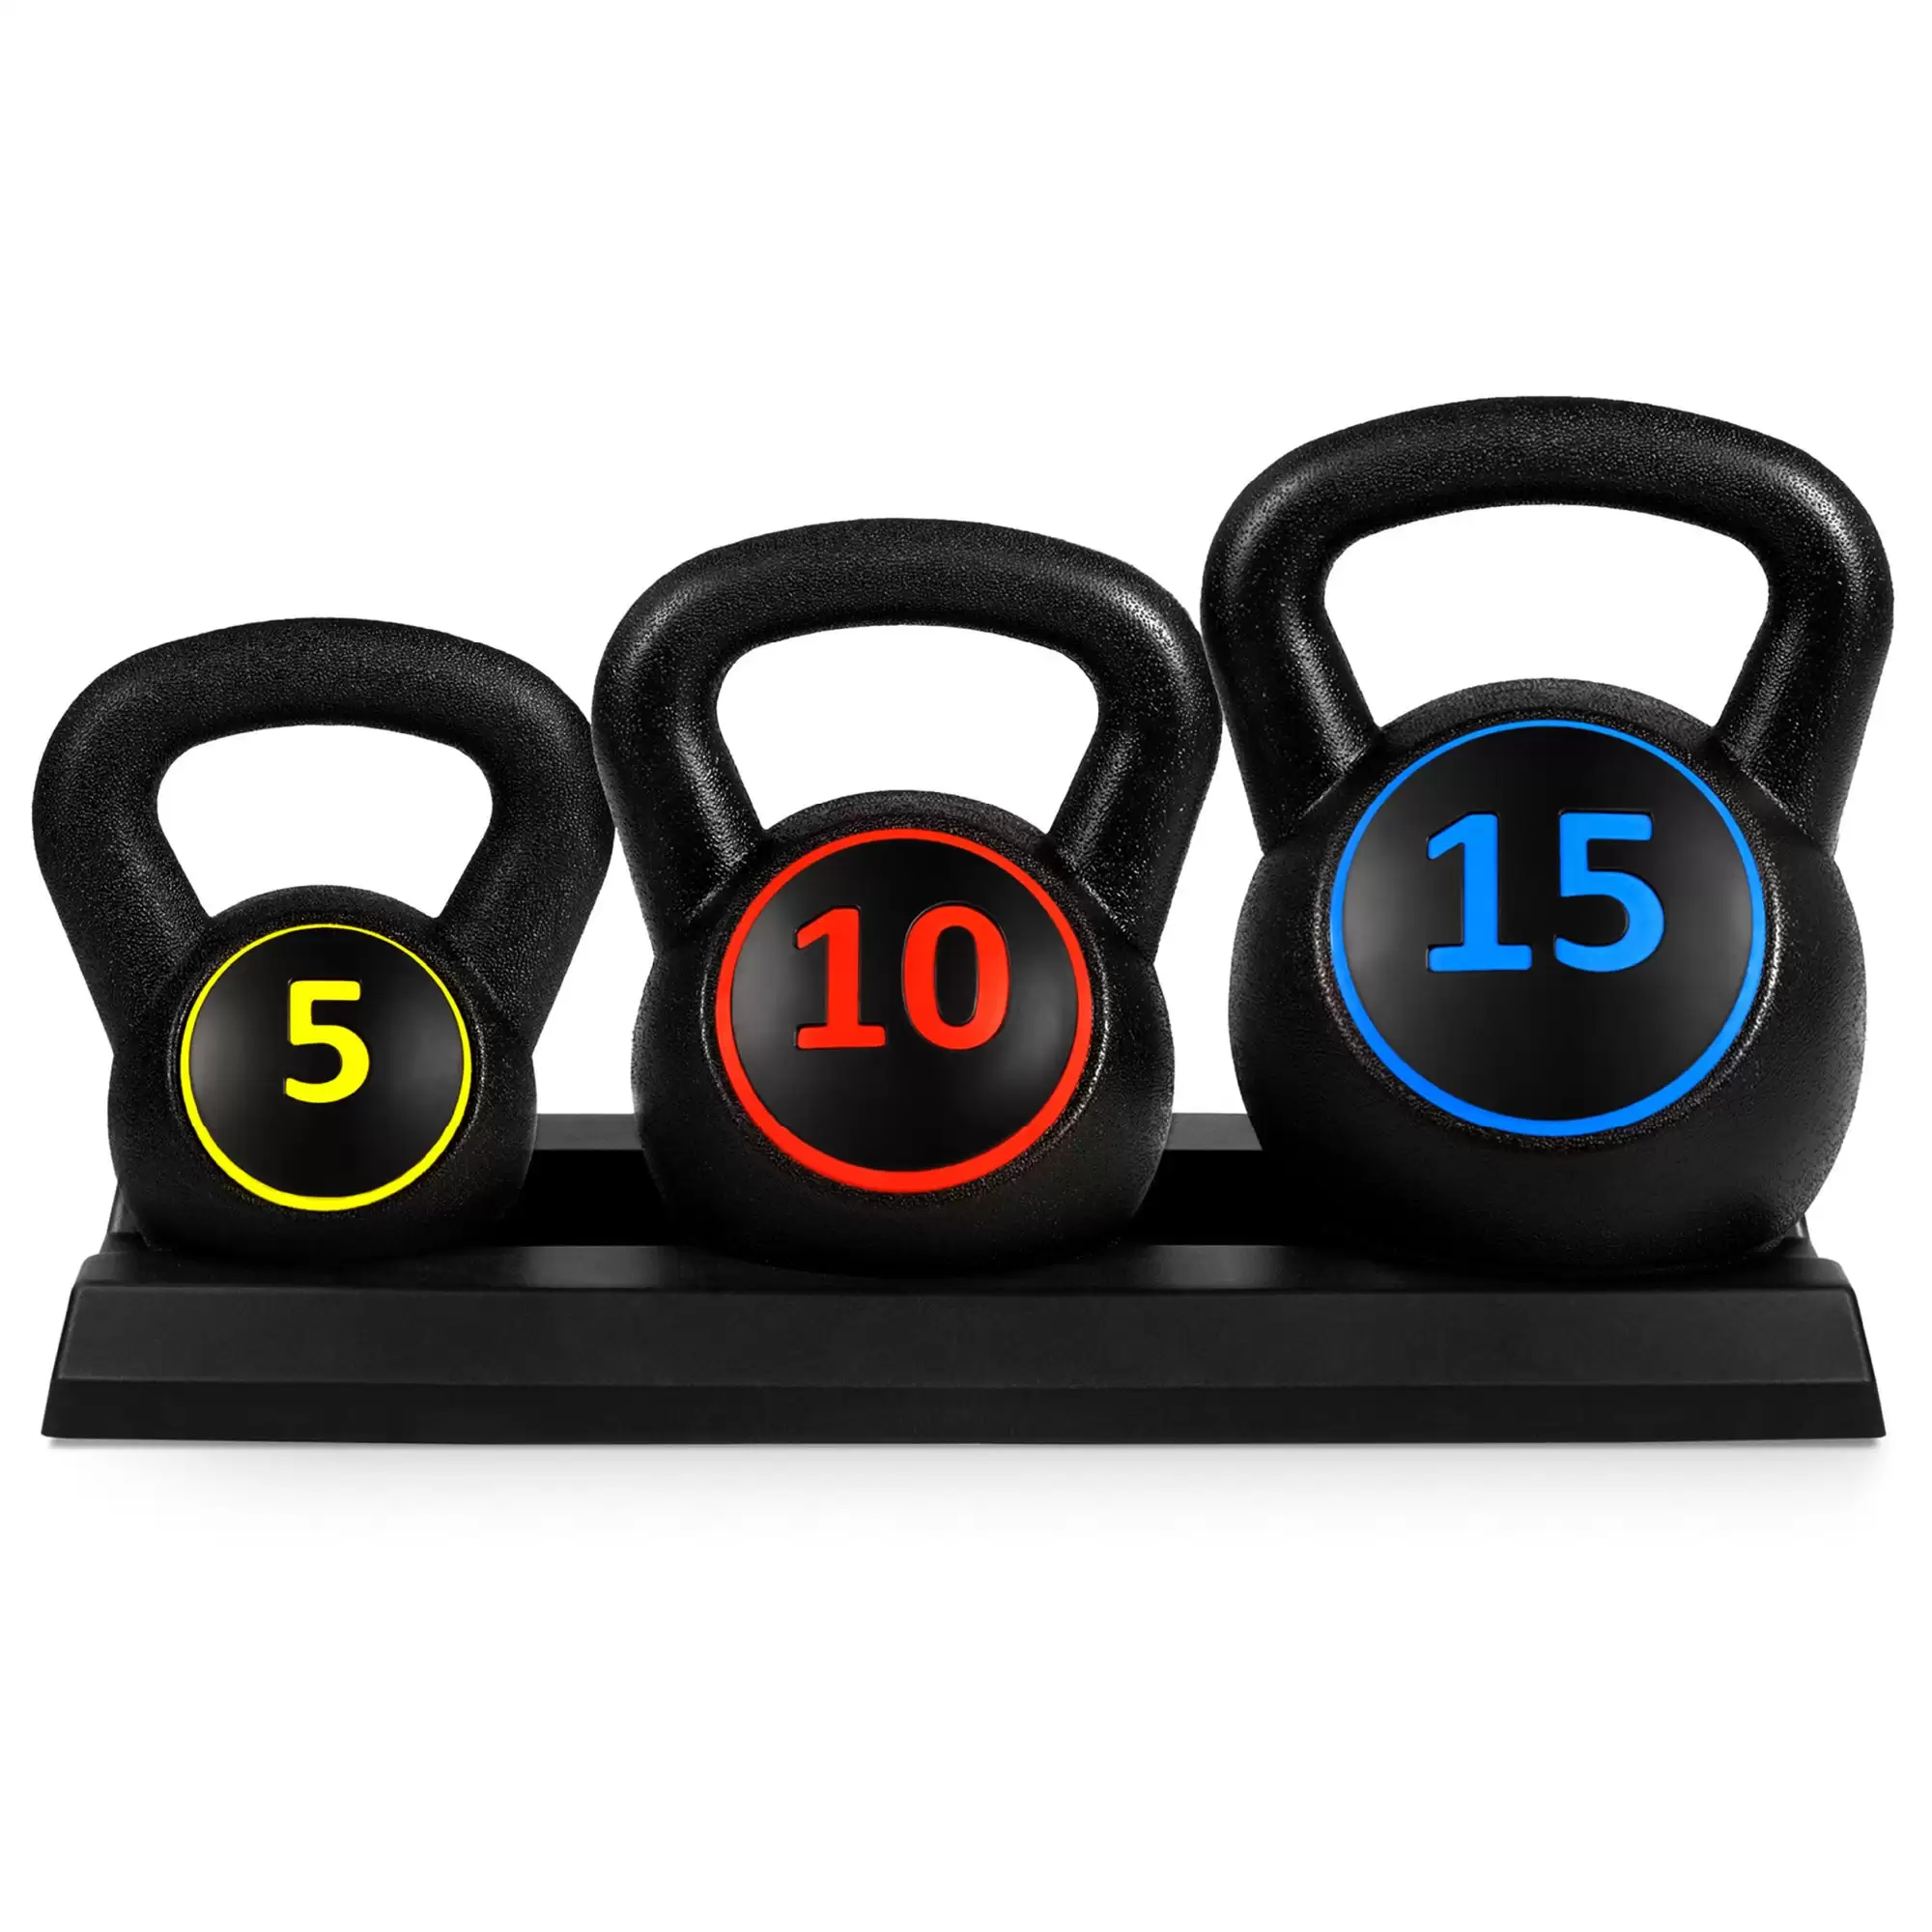 Pay $34.99 3-Piece Kettlebell Exercise Fitness Weight Set W/ Storage Rack With This Bestchoiceproducts Discount Voucher